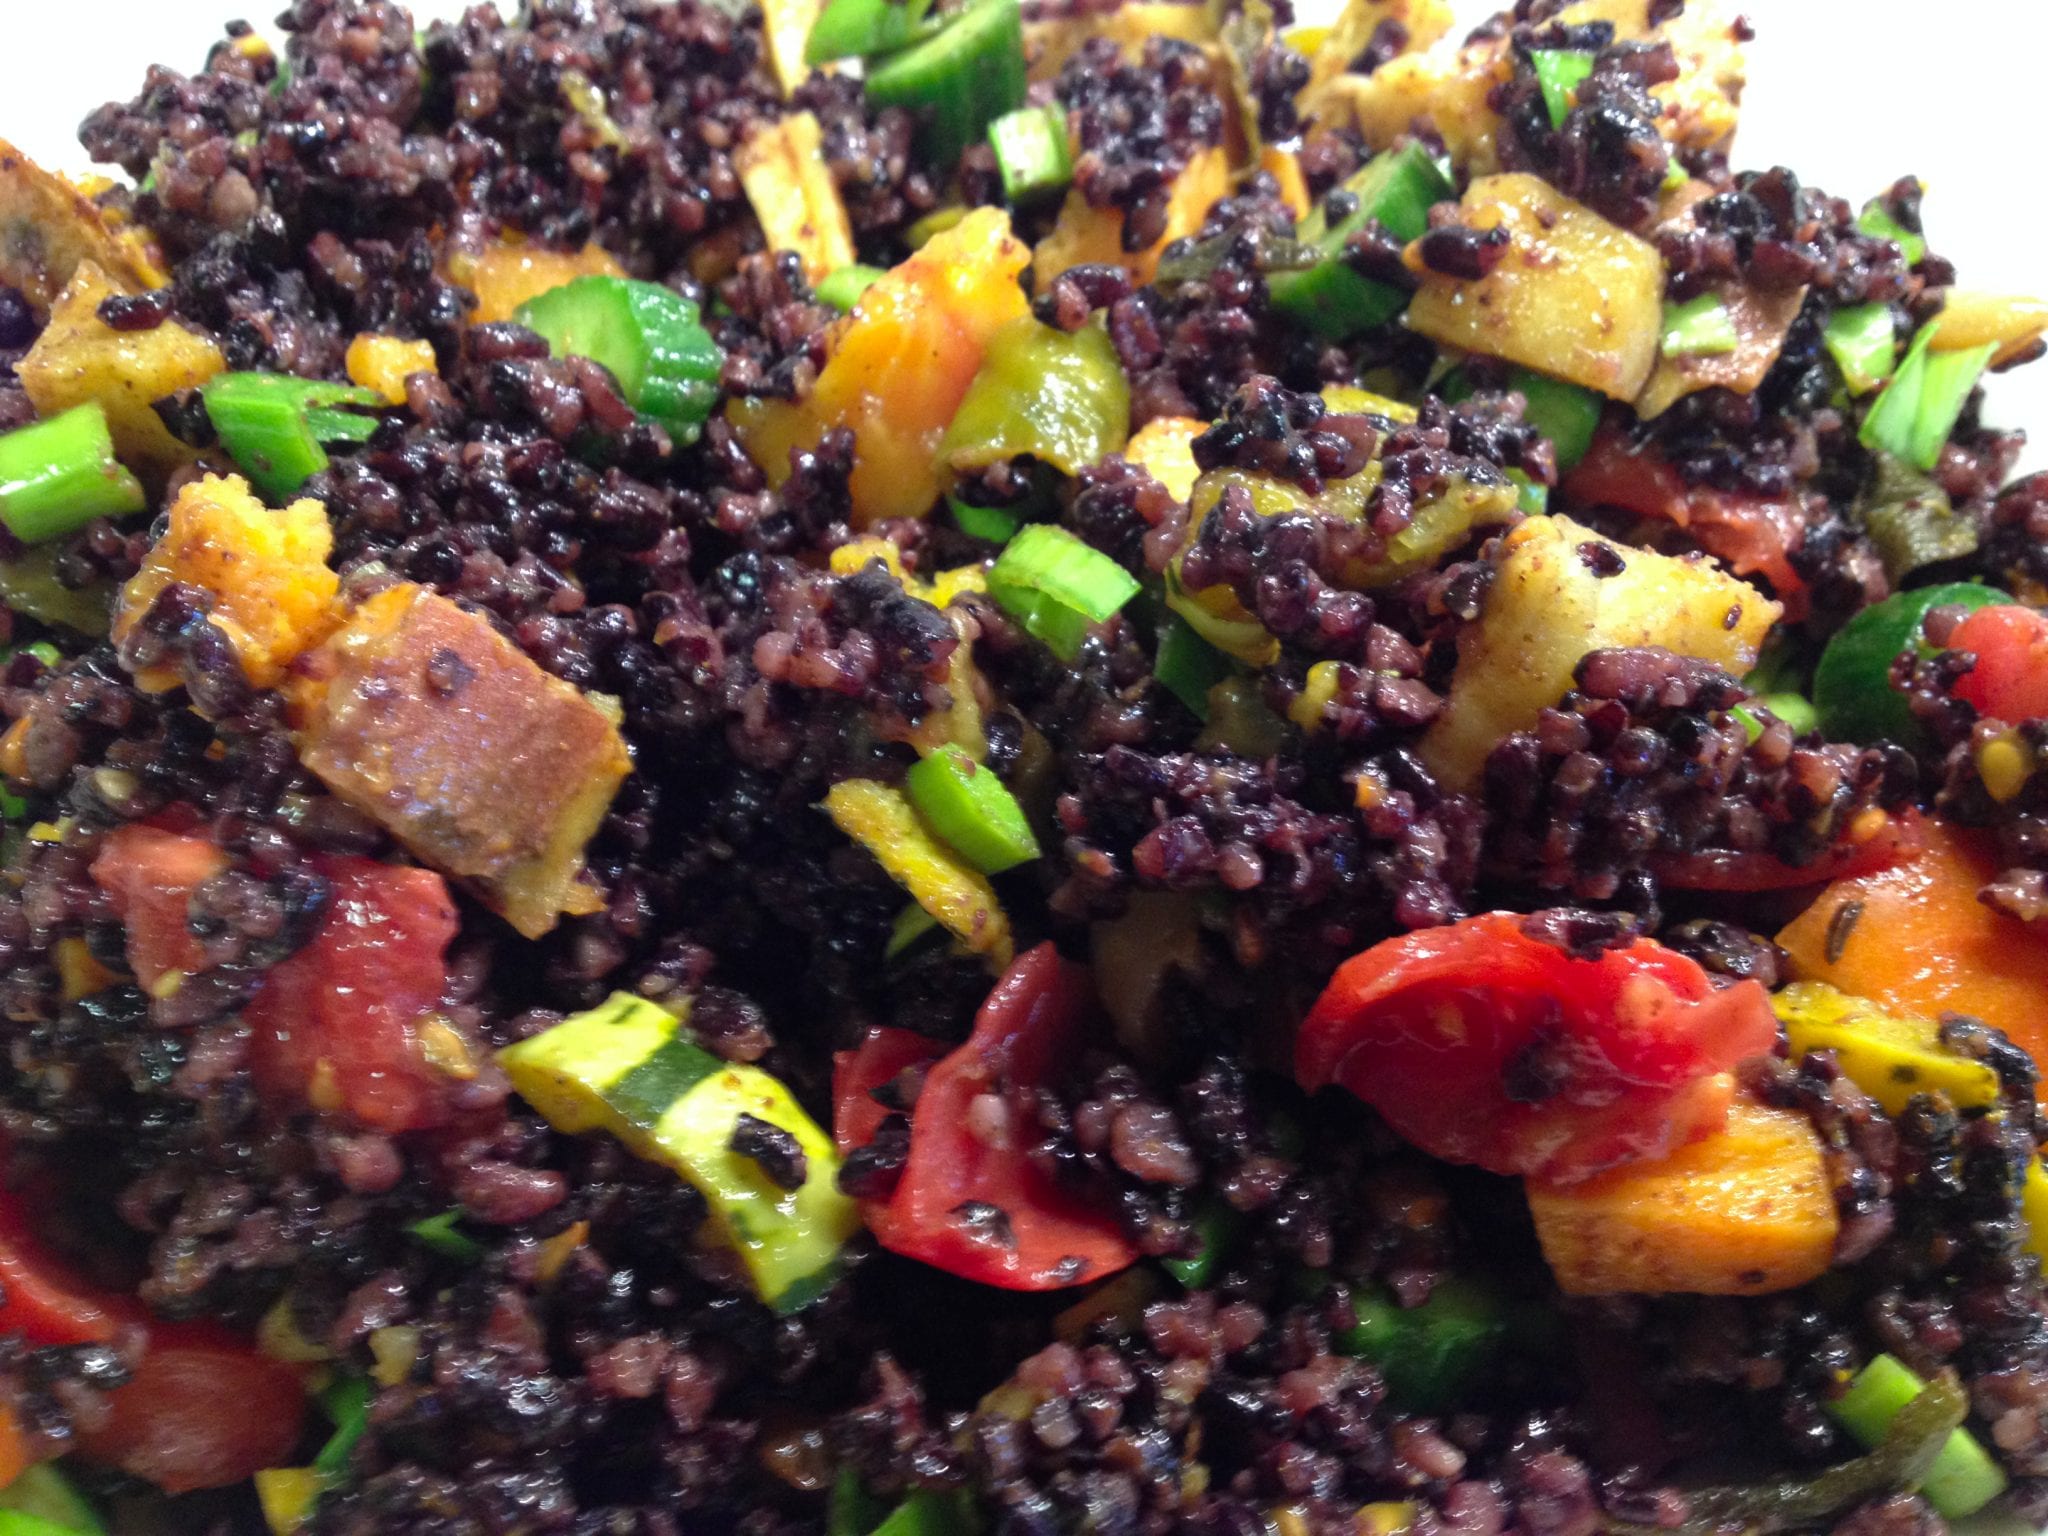 Black Rice Salad with Curried Roasted Vegetables